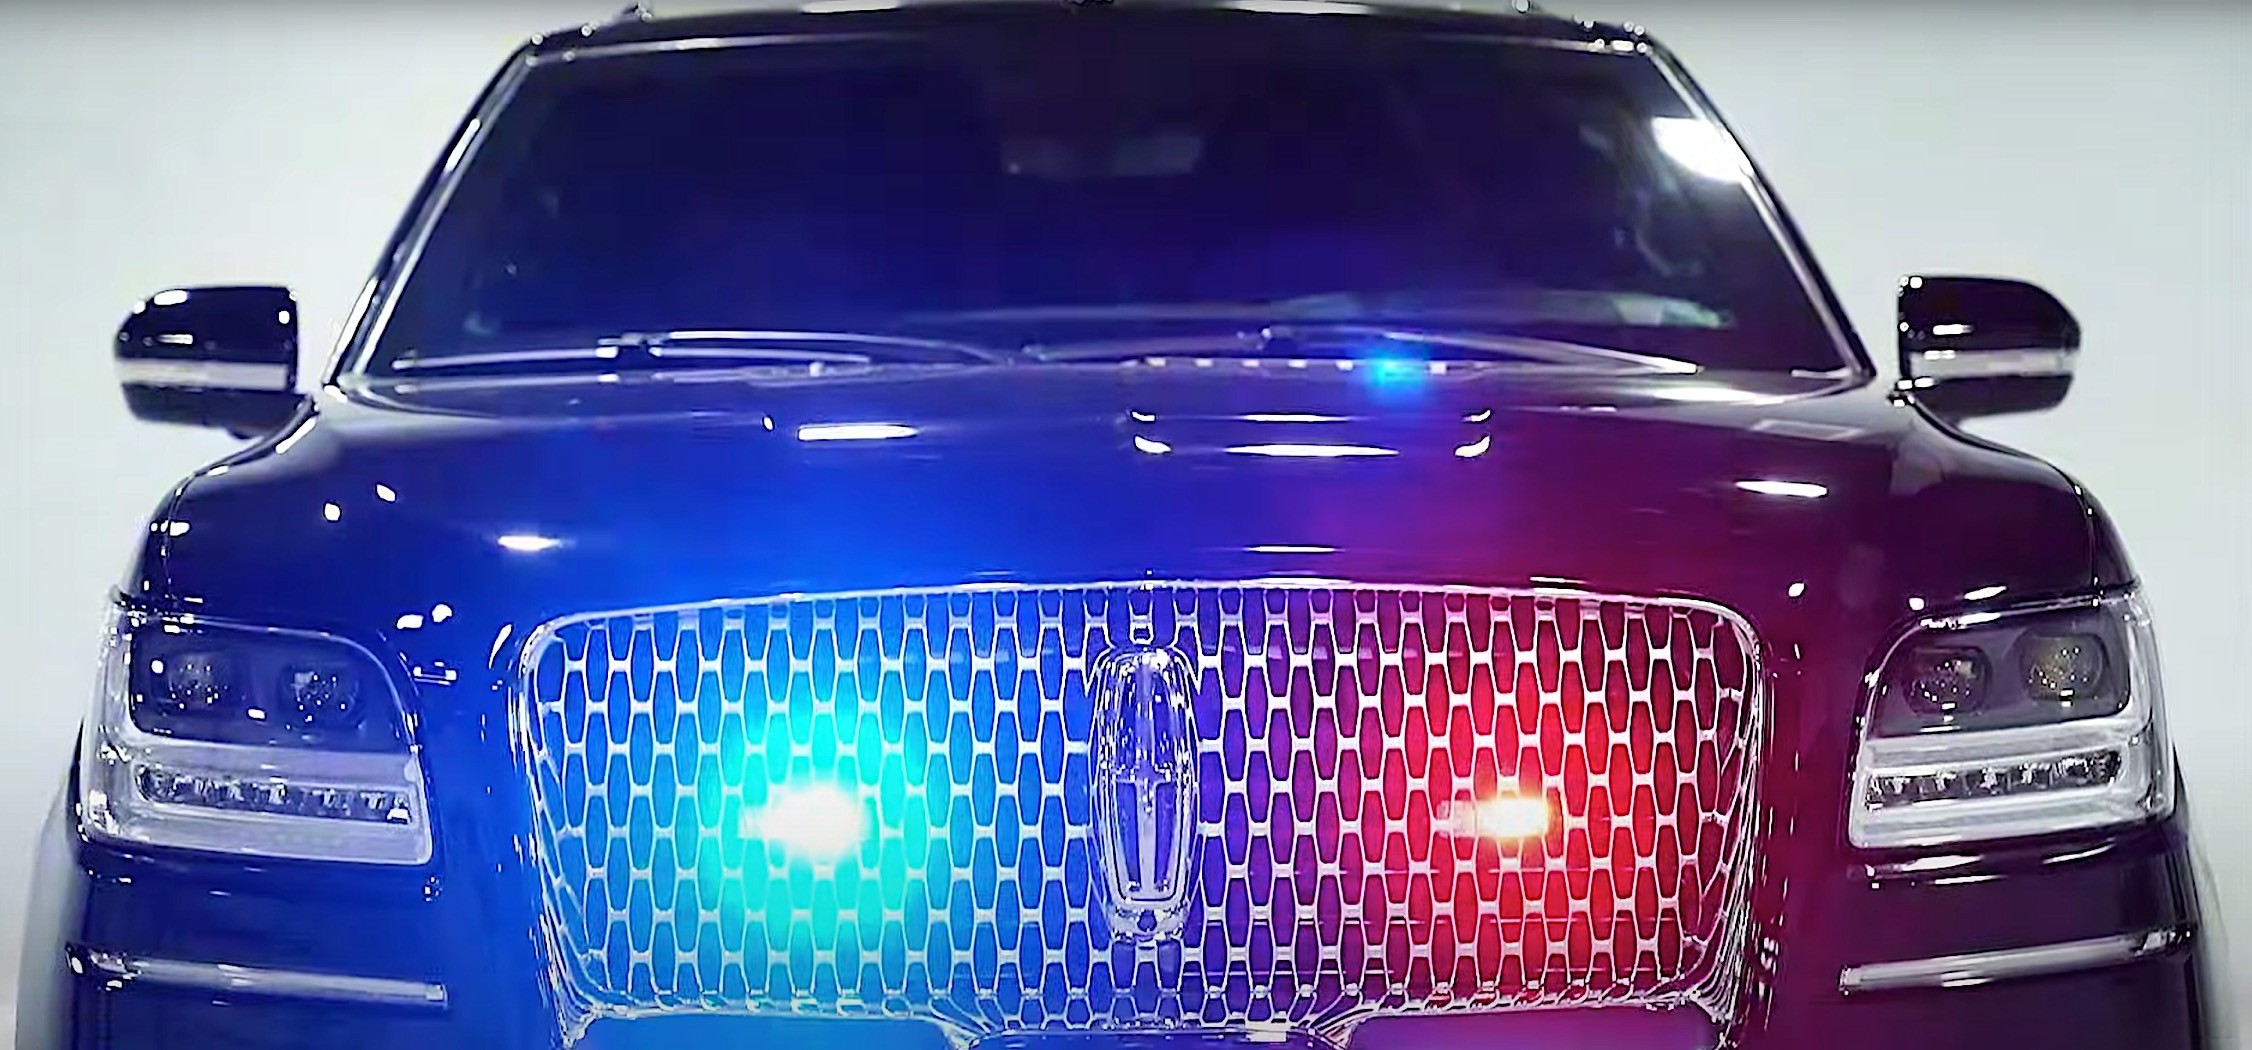 A head-on view of a black, armored 2020 Lincoln Navigator L from Inkas Armored Vehicle Manufacturing